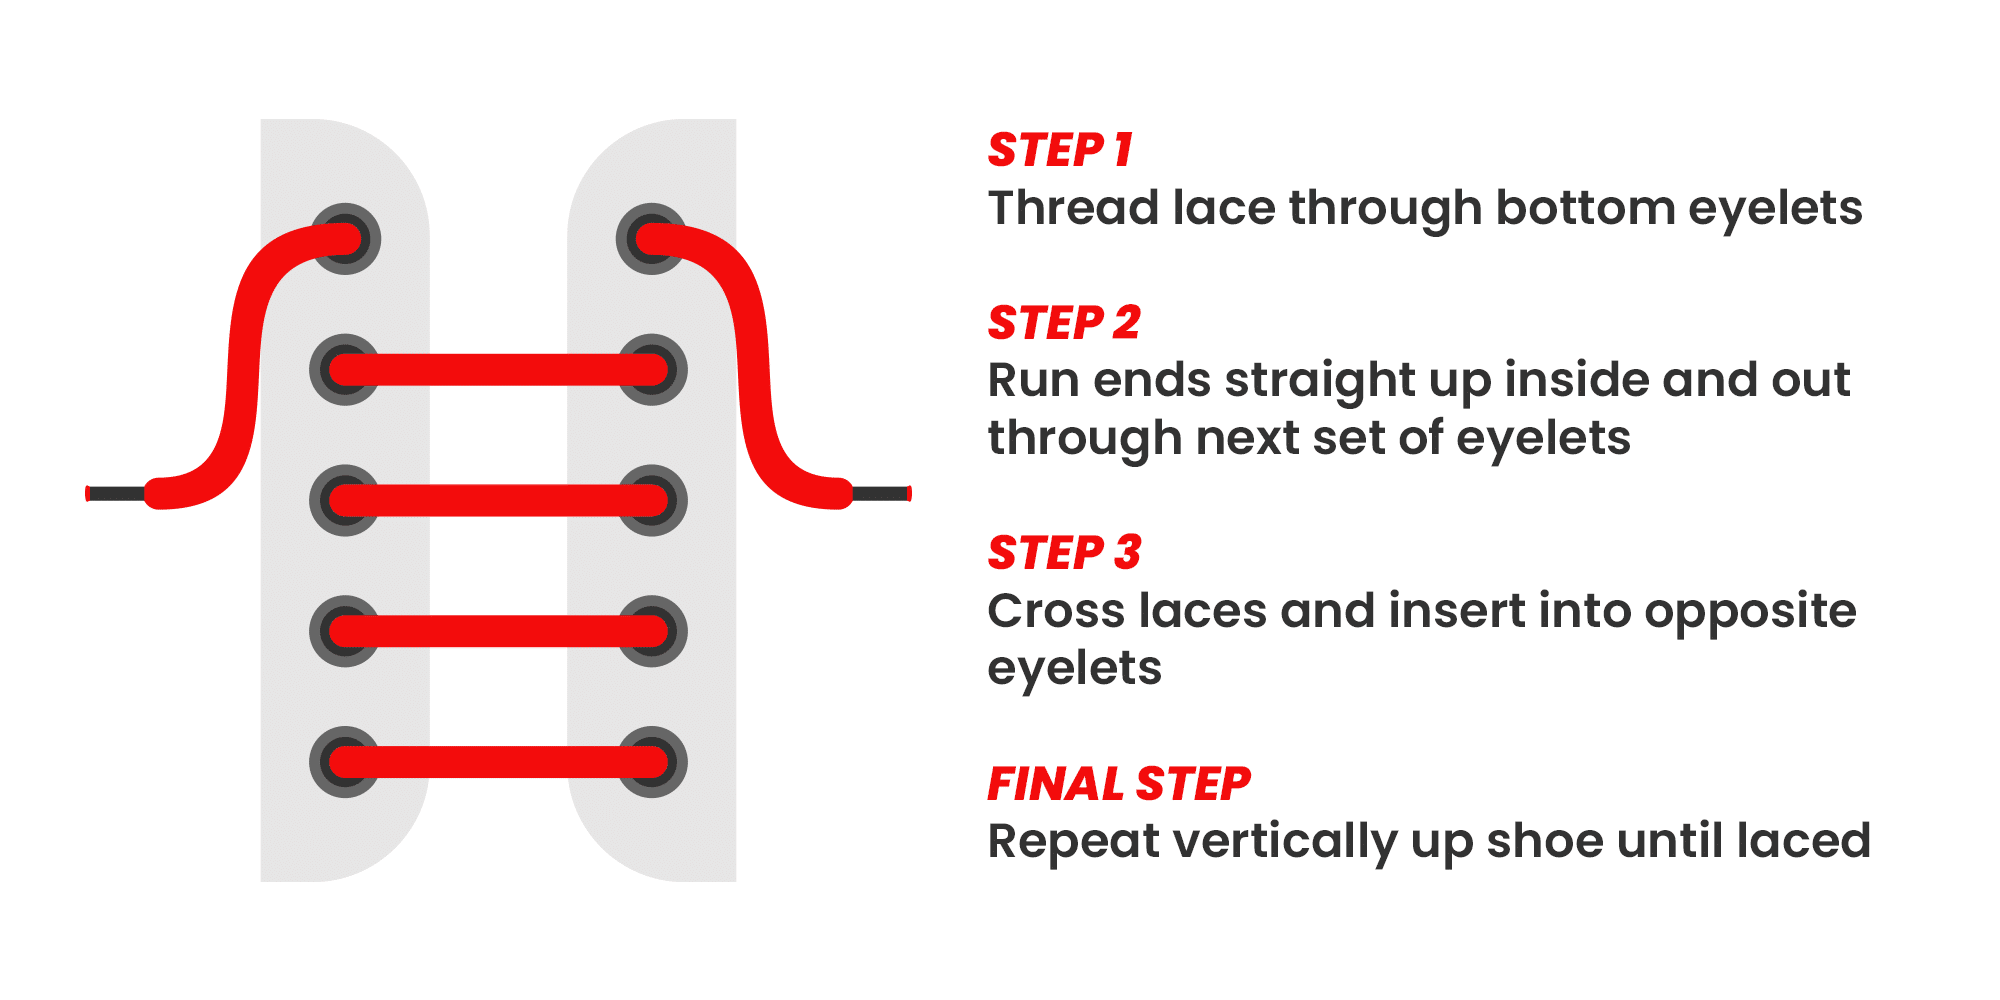 steps to bar lace shoes